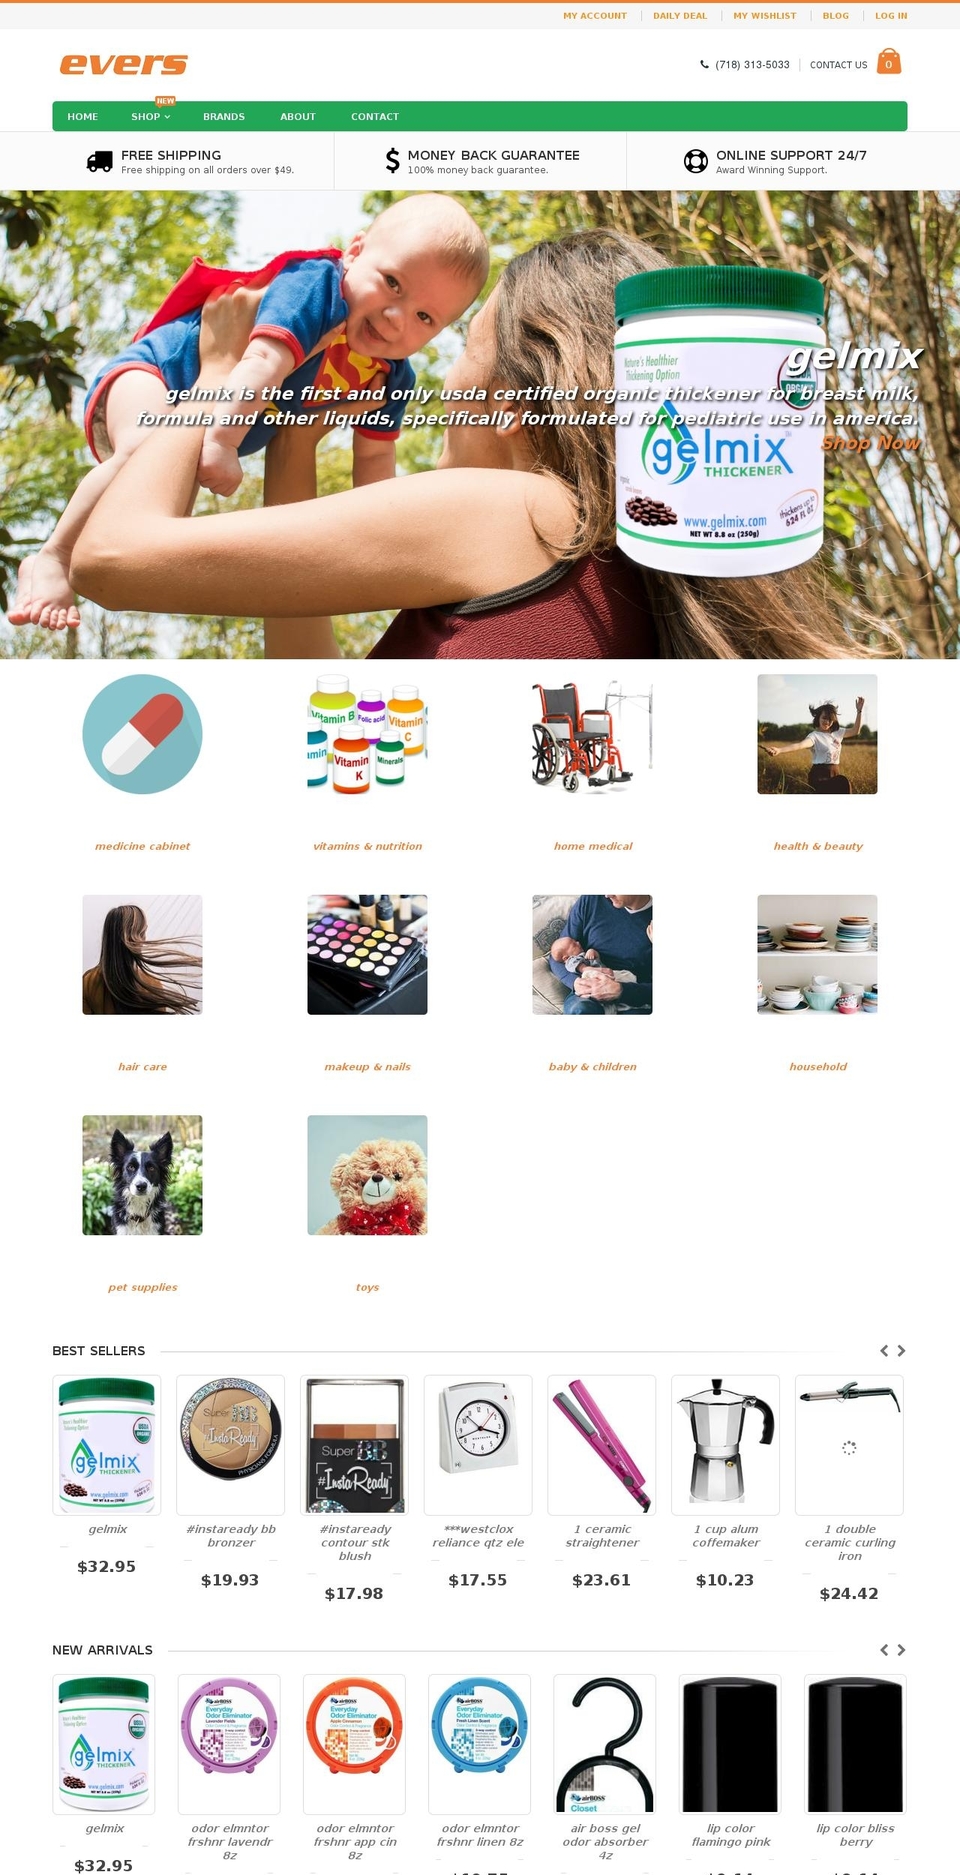 Made With ❤ By Minion Made Shopify theme site example eversdirect.com